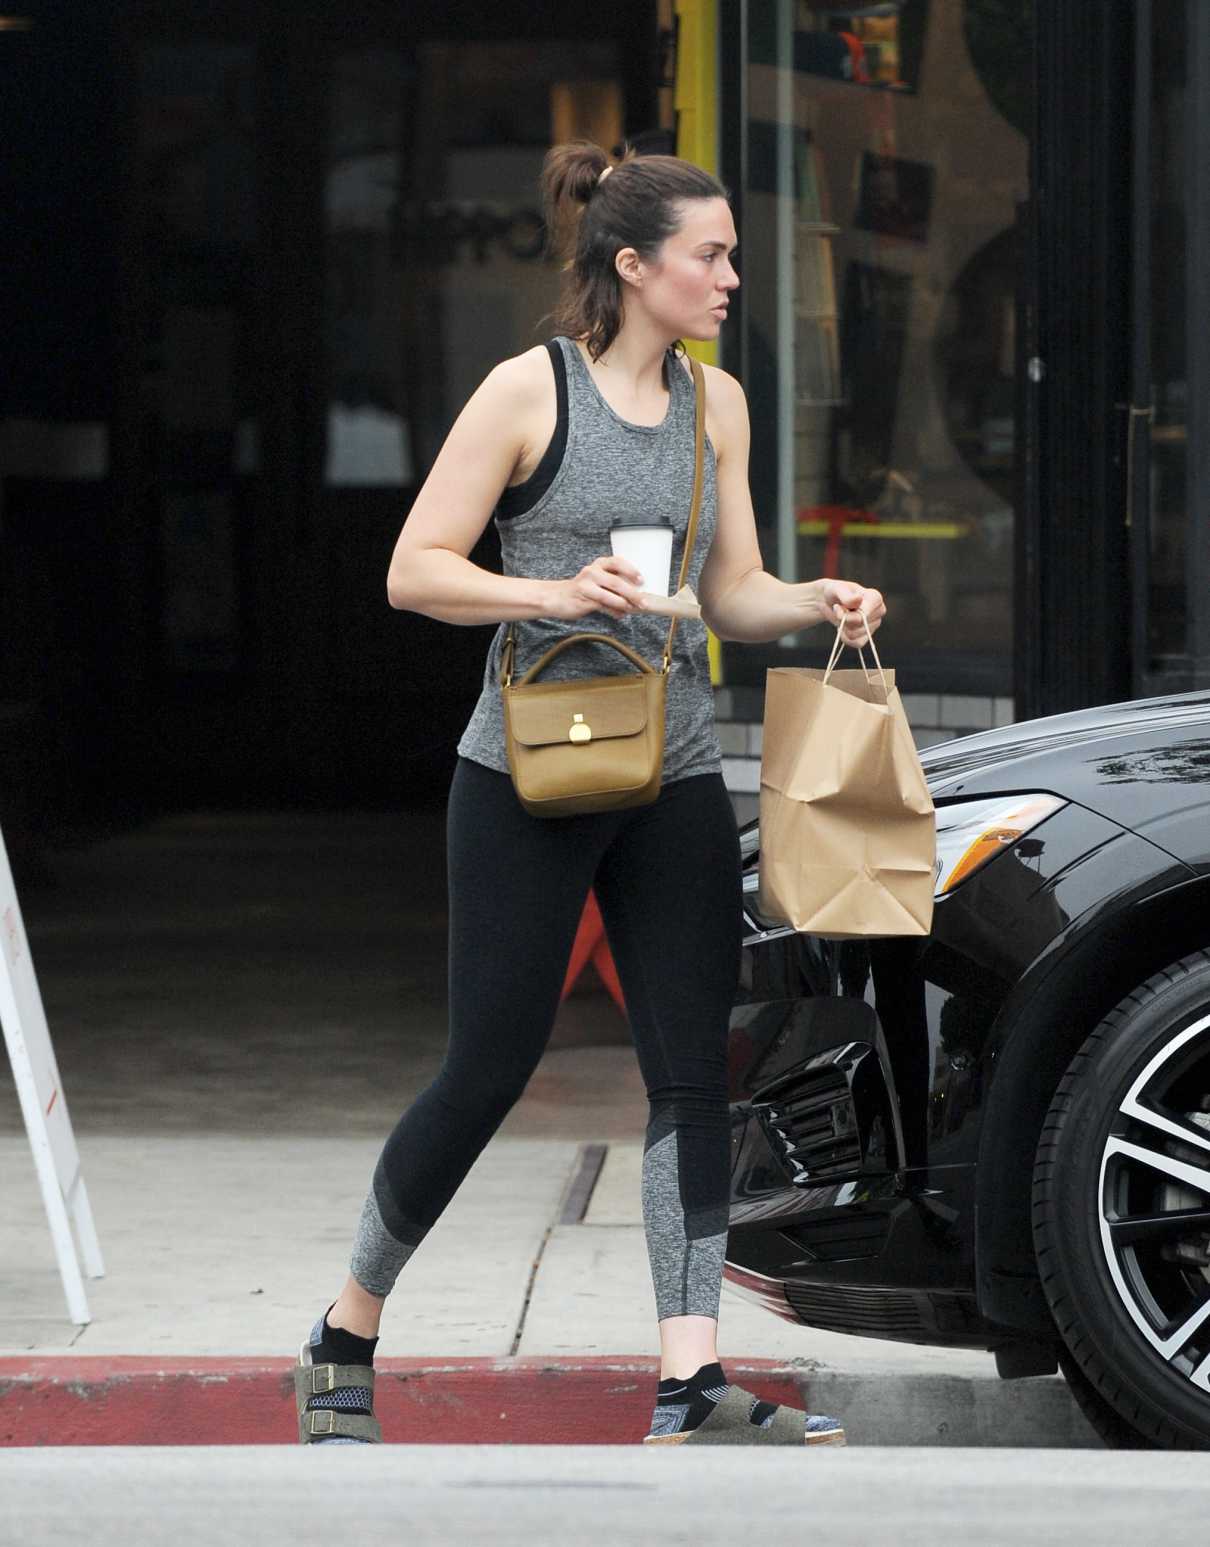 Mandy Moore In A Gray Tank Top Was Seen Out Los Angeles 05/31/2019 5.